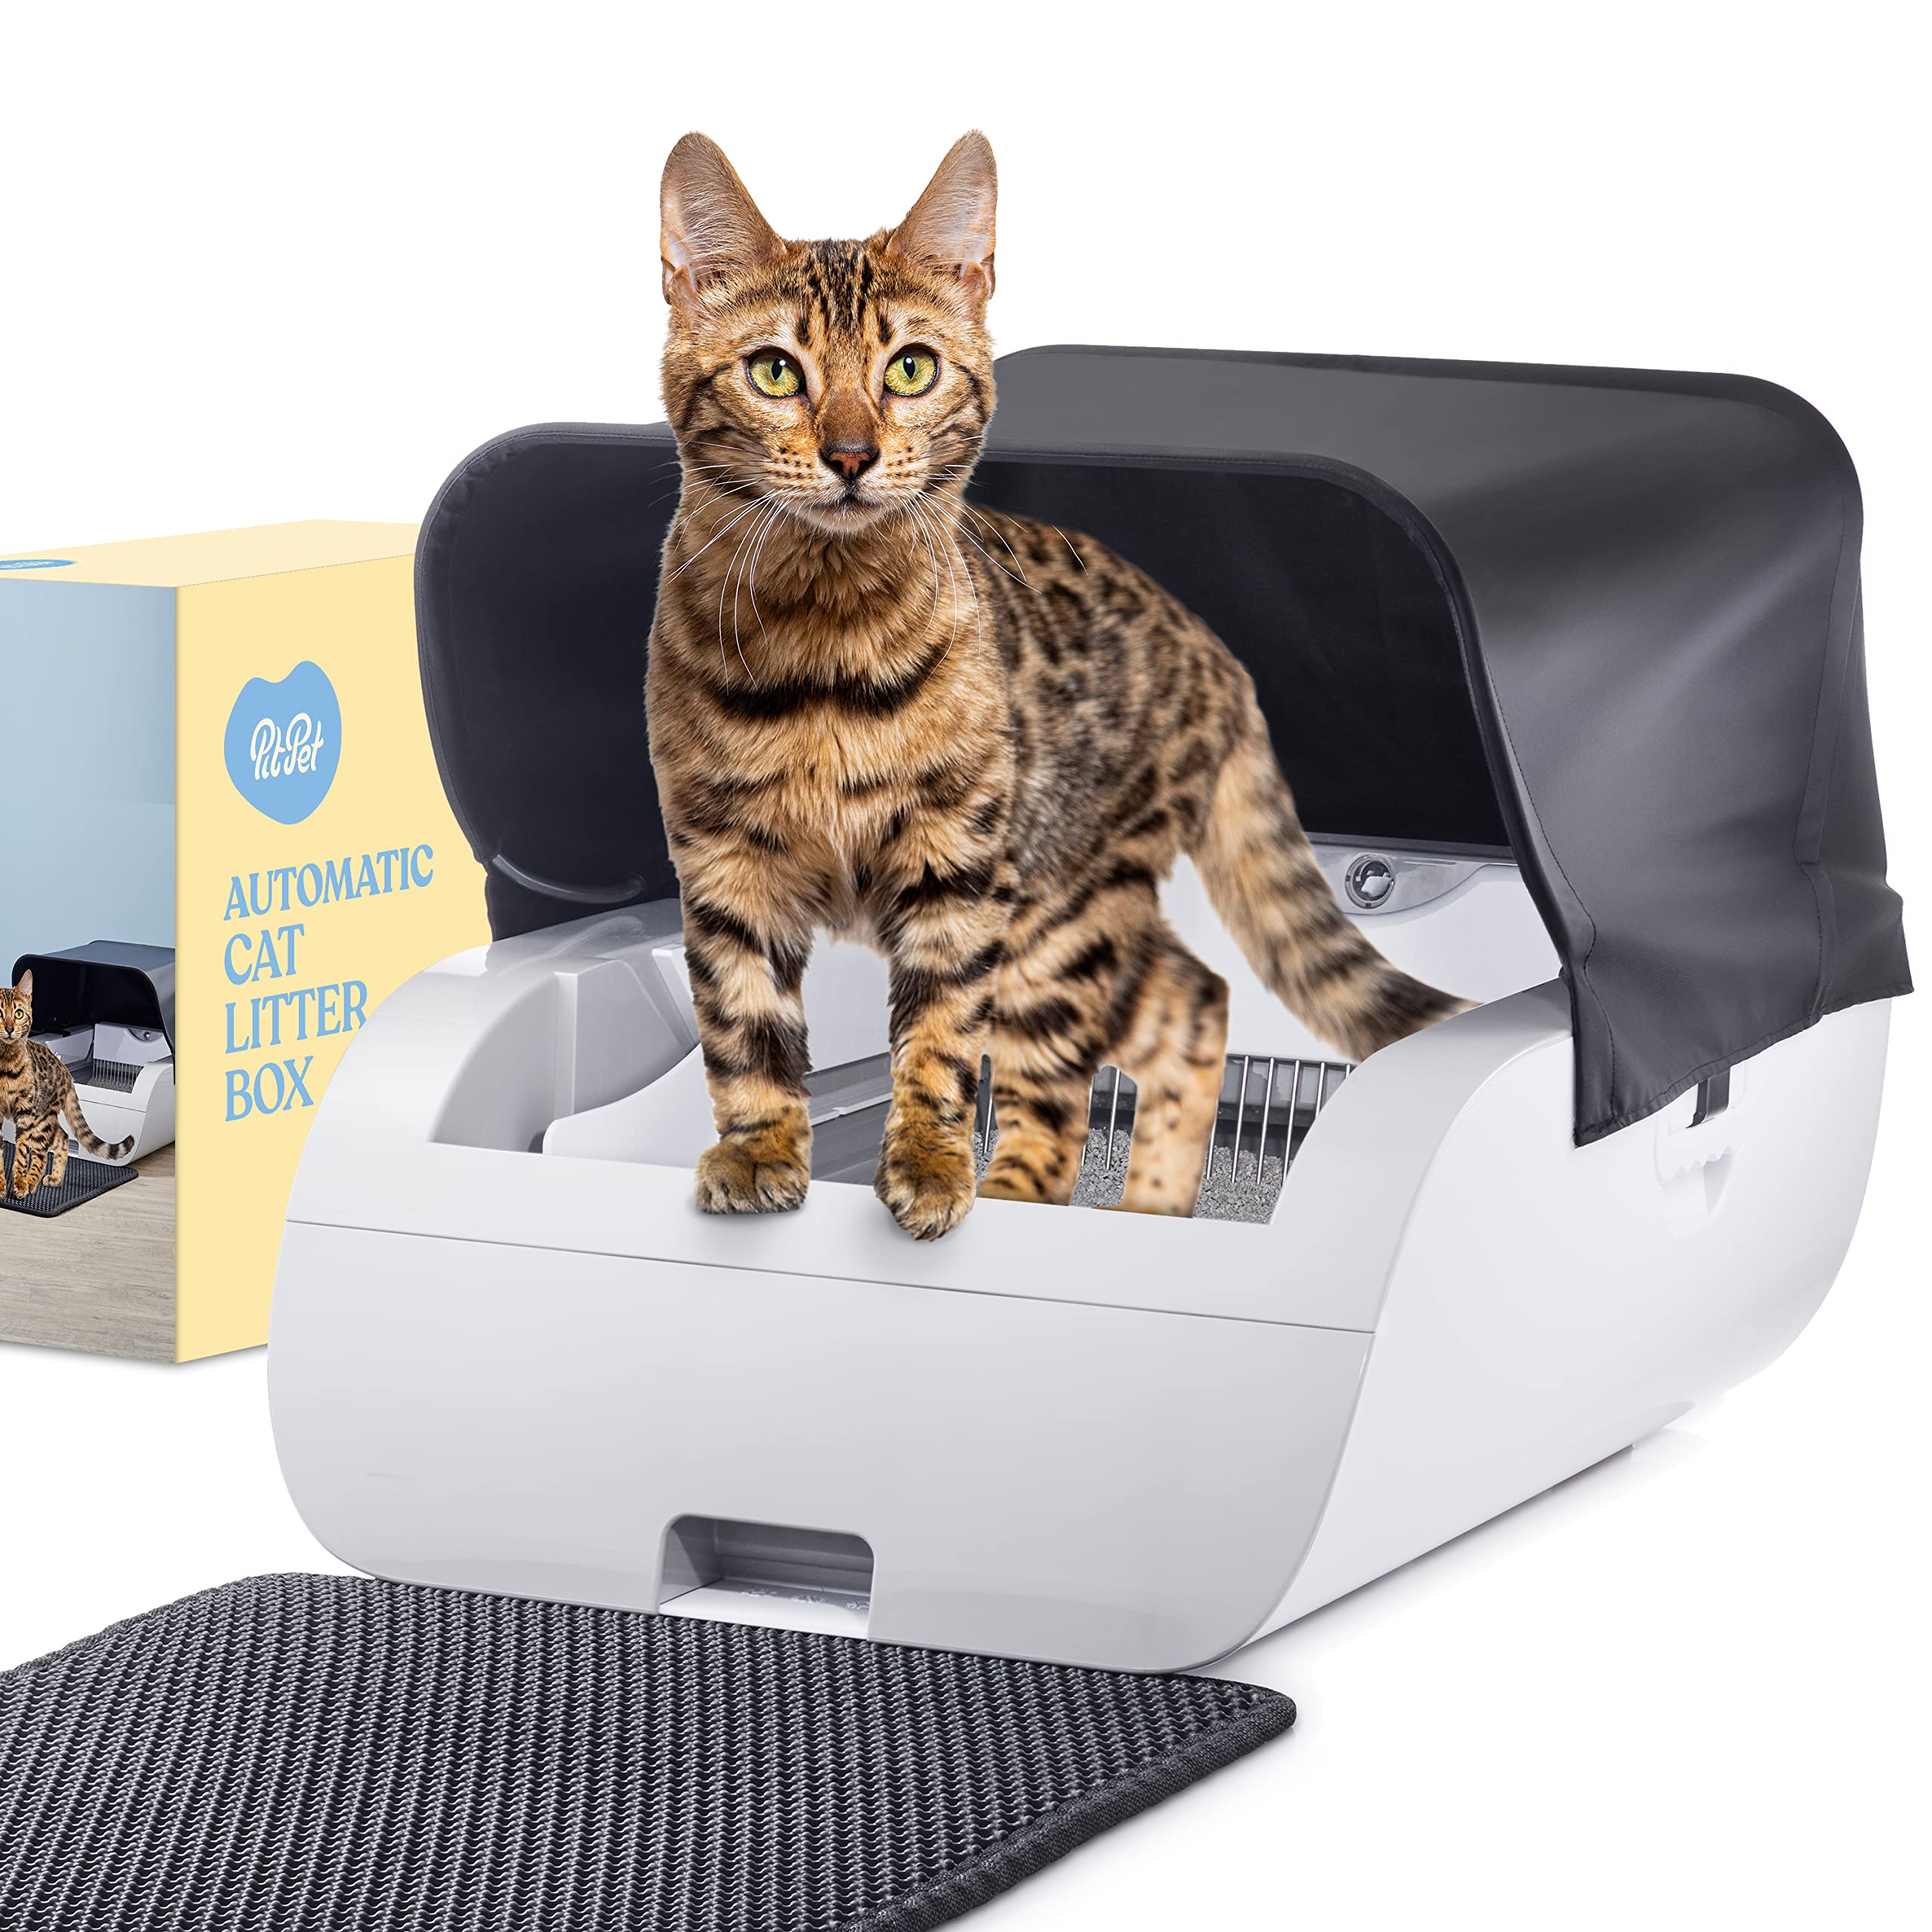 Smart Automatic Cat Litter Box - Self Cleaning Cat Litter Box with Built in Odor Eliminator -Works with Clumping Cat Litter (No Expensive Refills) Large Cat Litter Box with Hood & Litter Mat.  - Like New